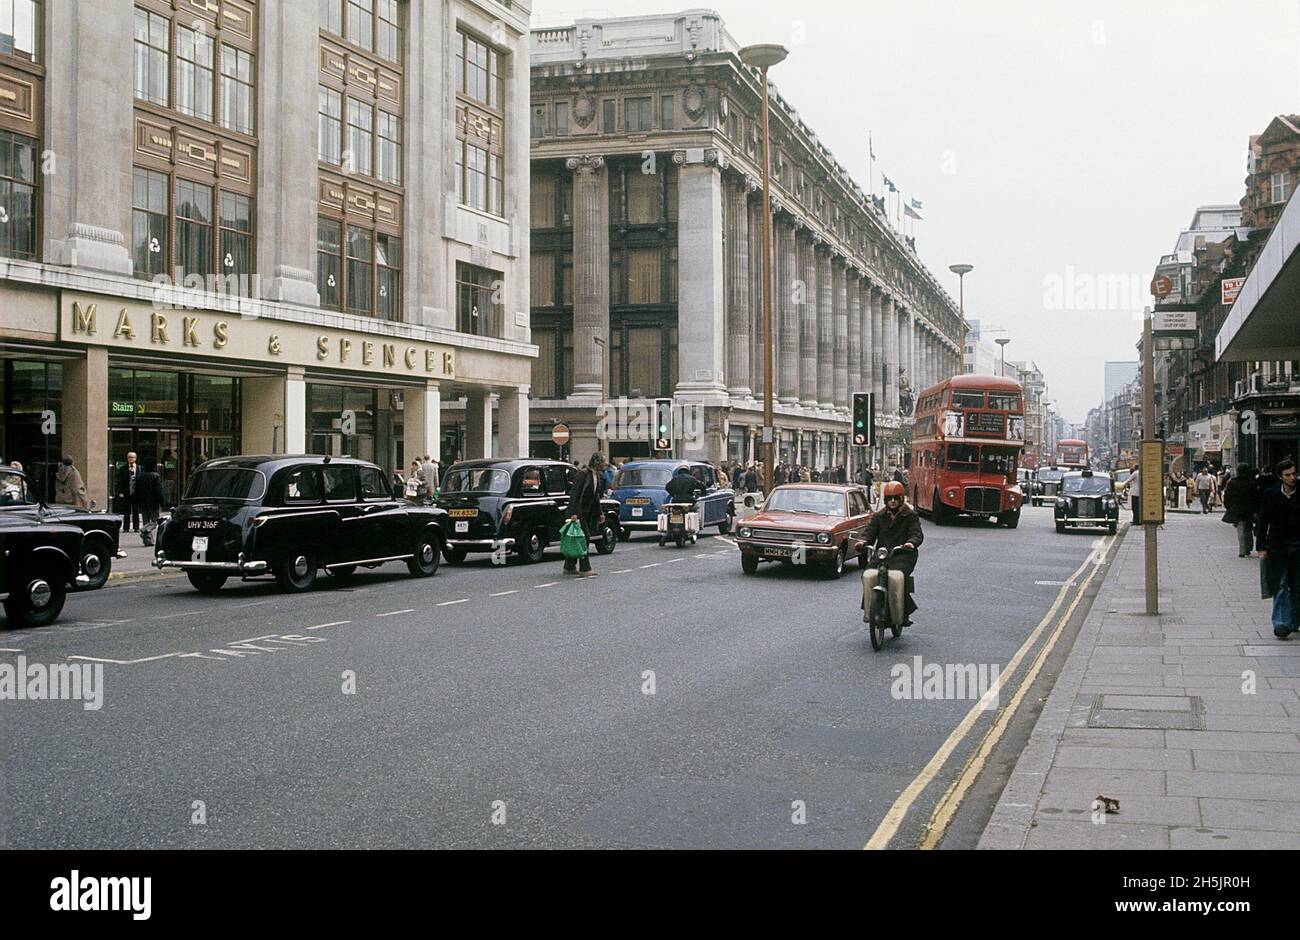 London 1982. A street view of Oxford street with the traffic passing, buses and taxis. Credit Roland Palm. Stock Photo